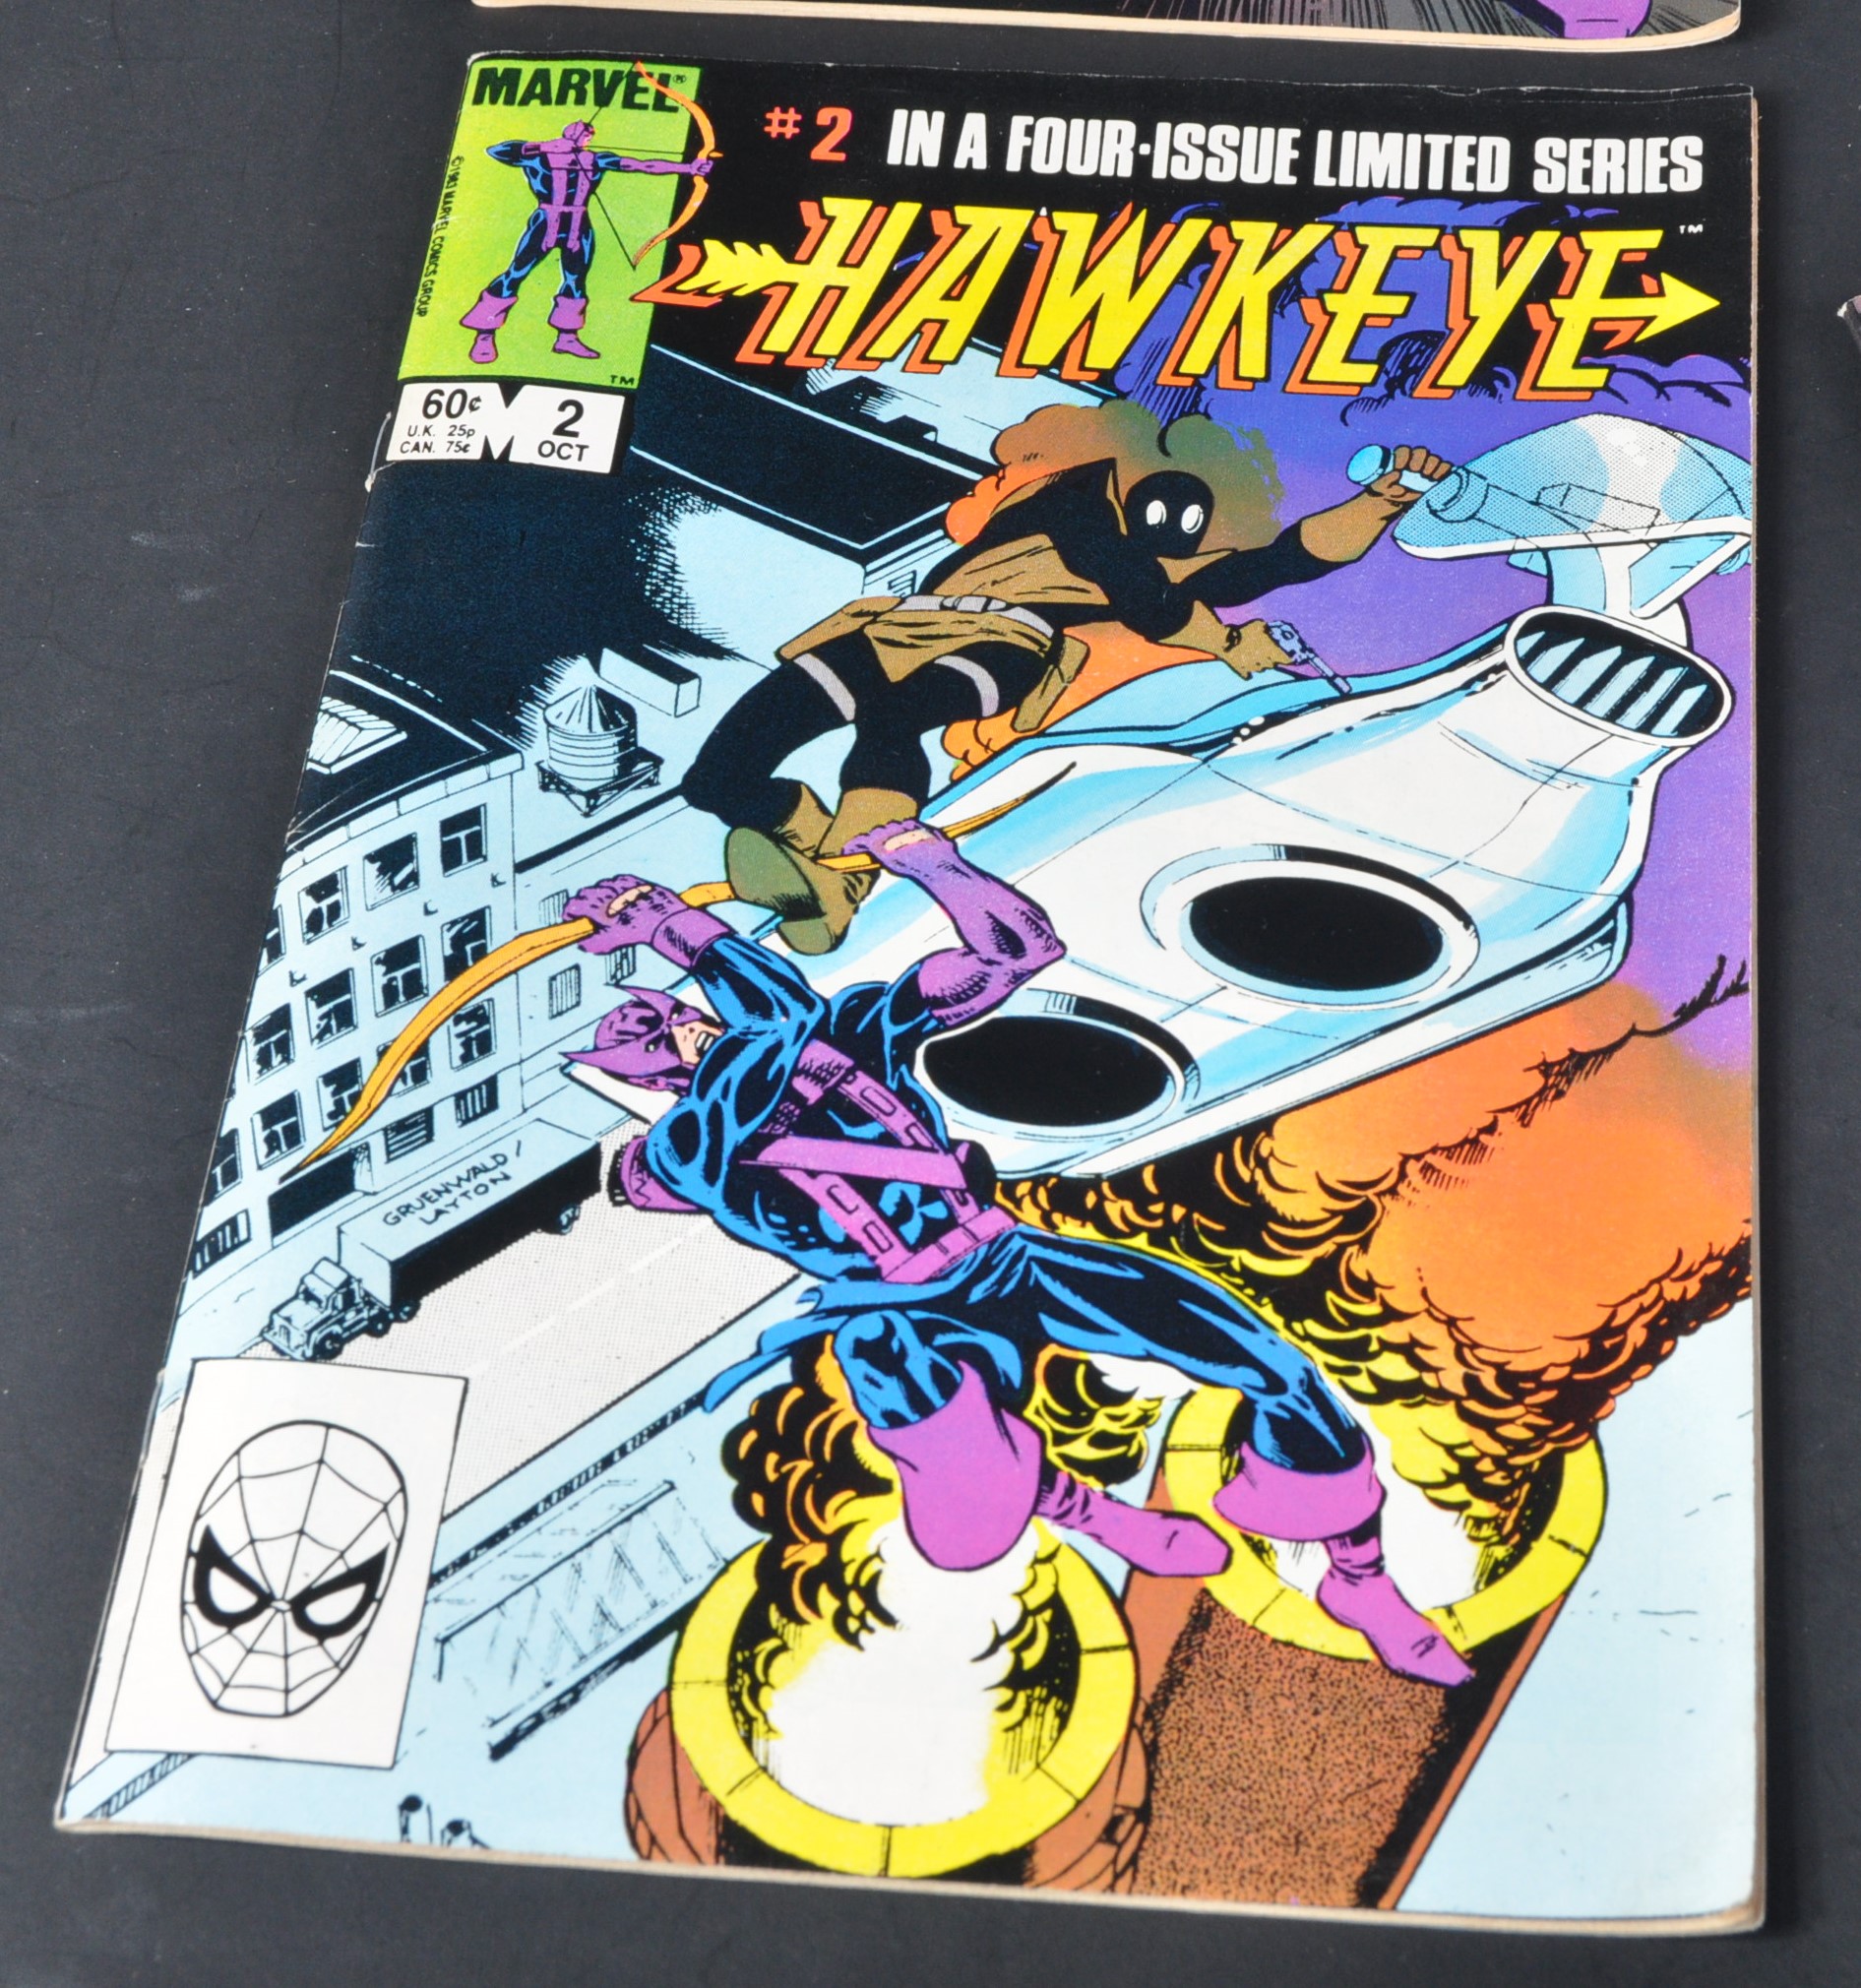 MARVEL COMICS - HAWKEYE - COLLECTION OF VINTAGE COMIC BOOKS - Image 3 of 9